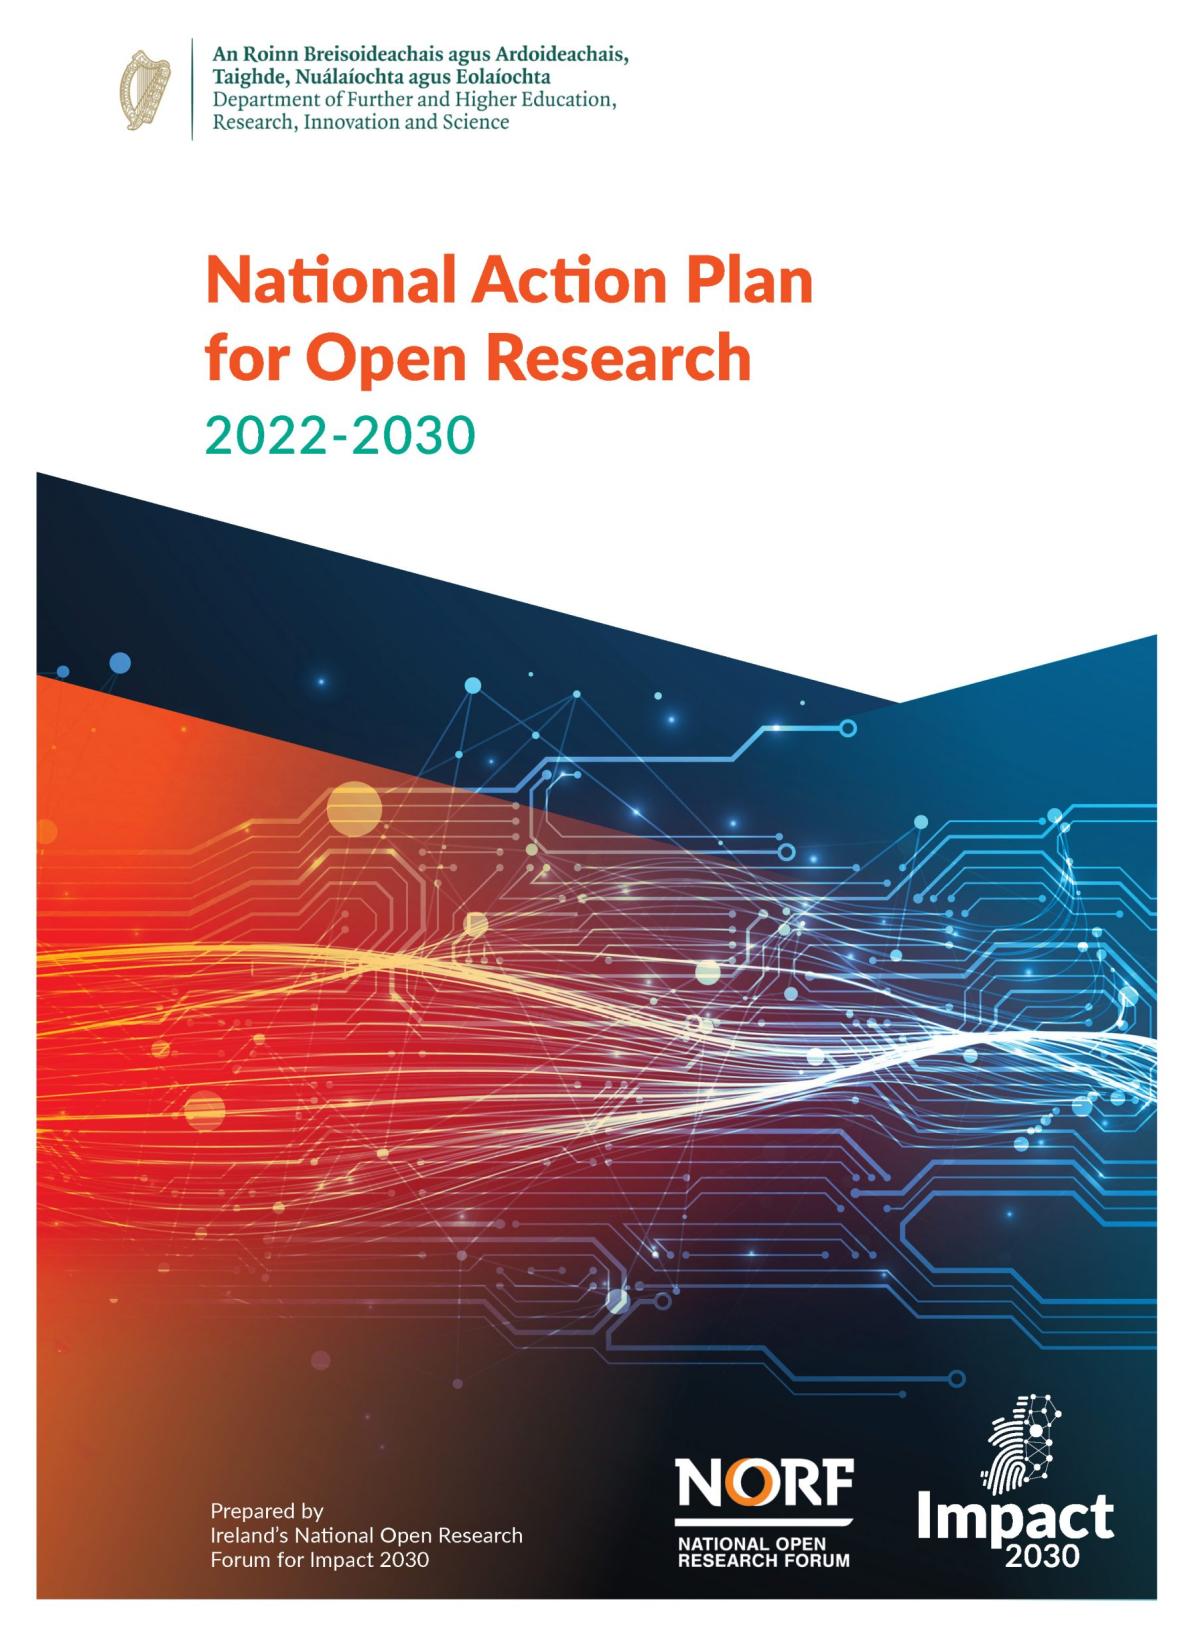 National Action Plan For Open Research 2022-2030